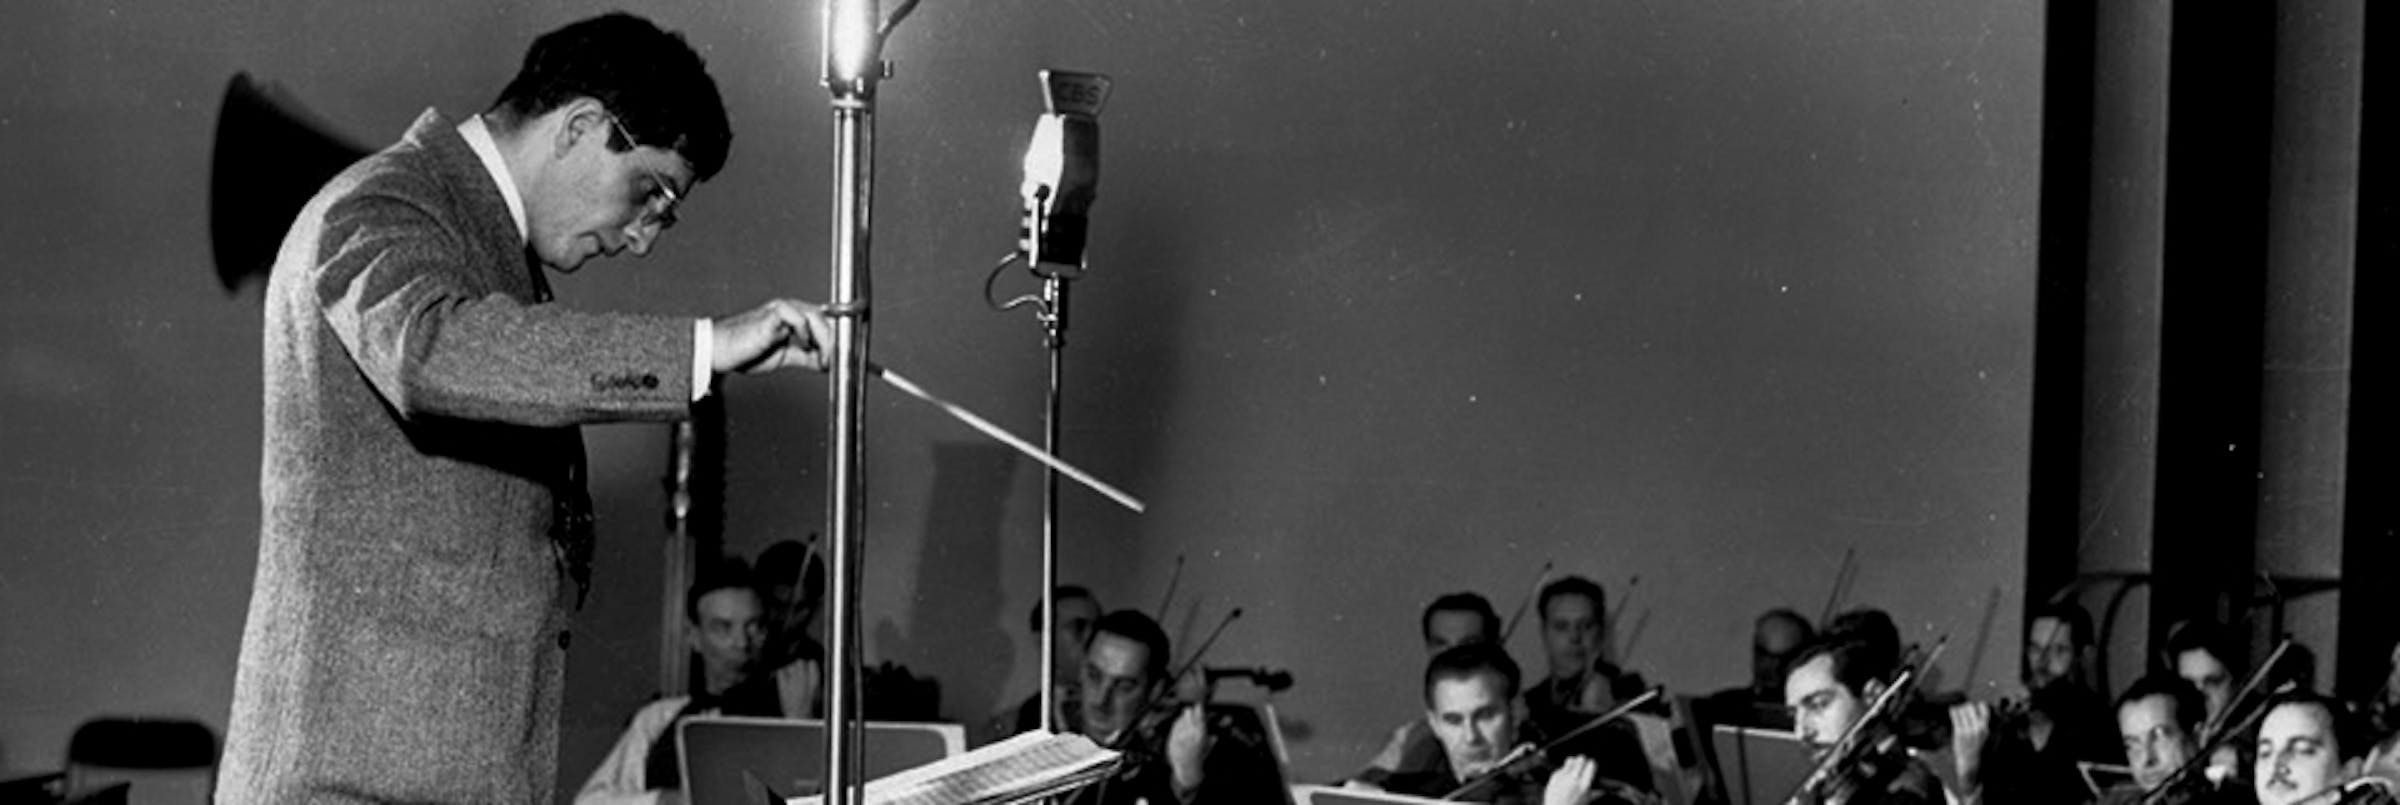 Bernard Herrmann conducting his orchestra, in black and white